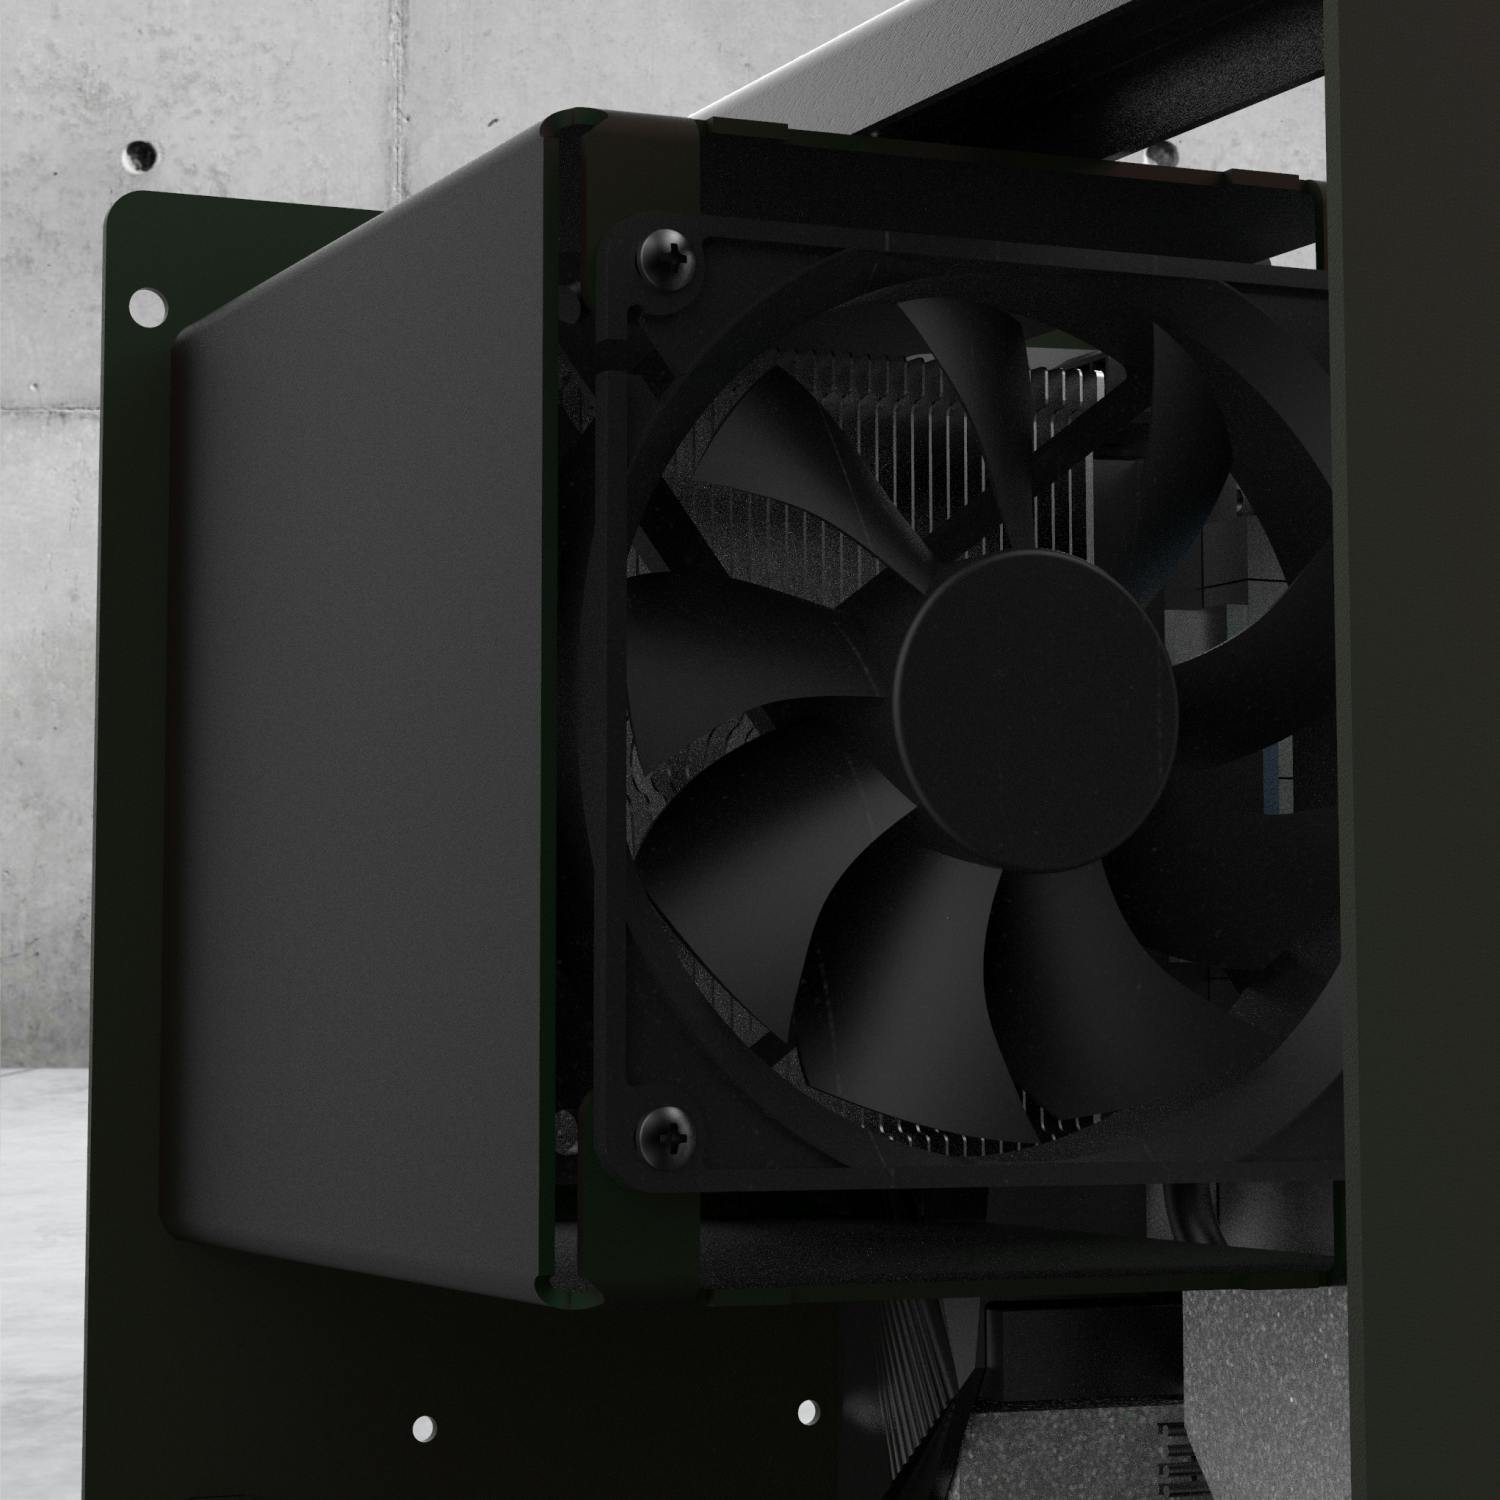 Detail of the CPU cooling duct with fan.